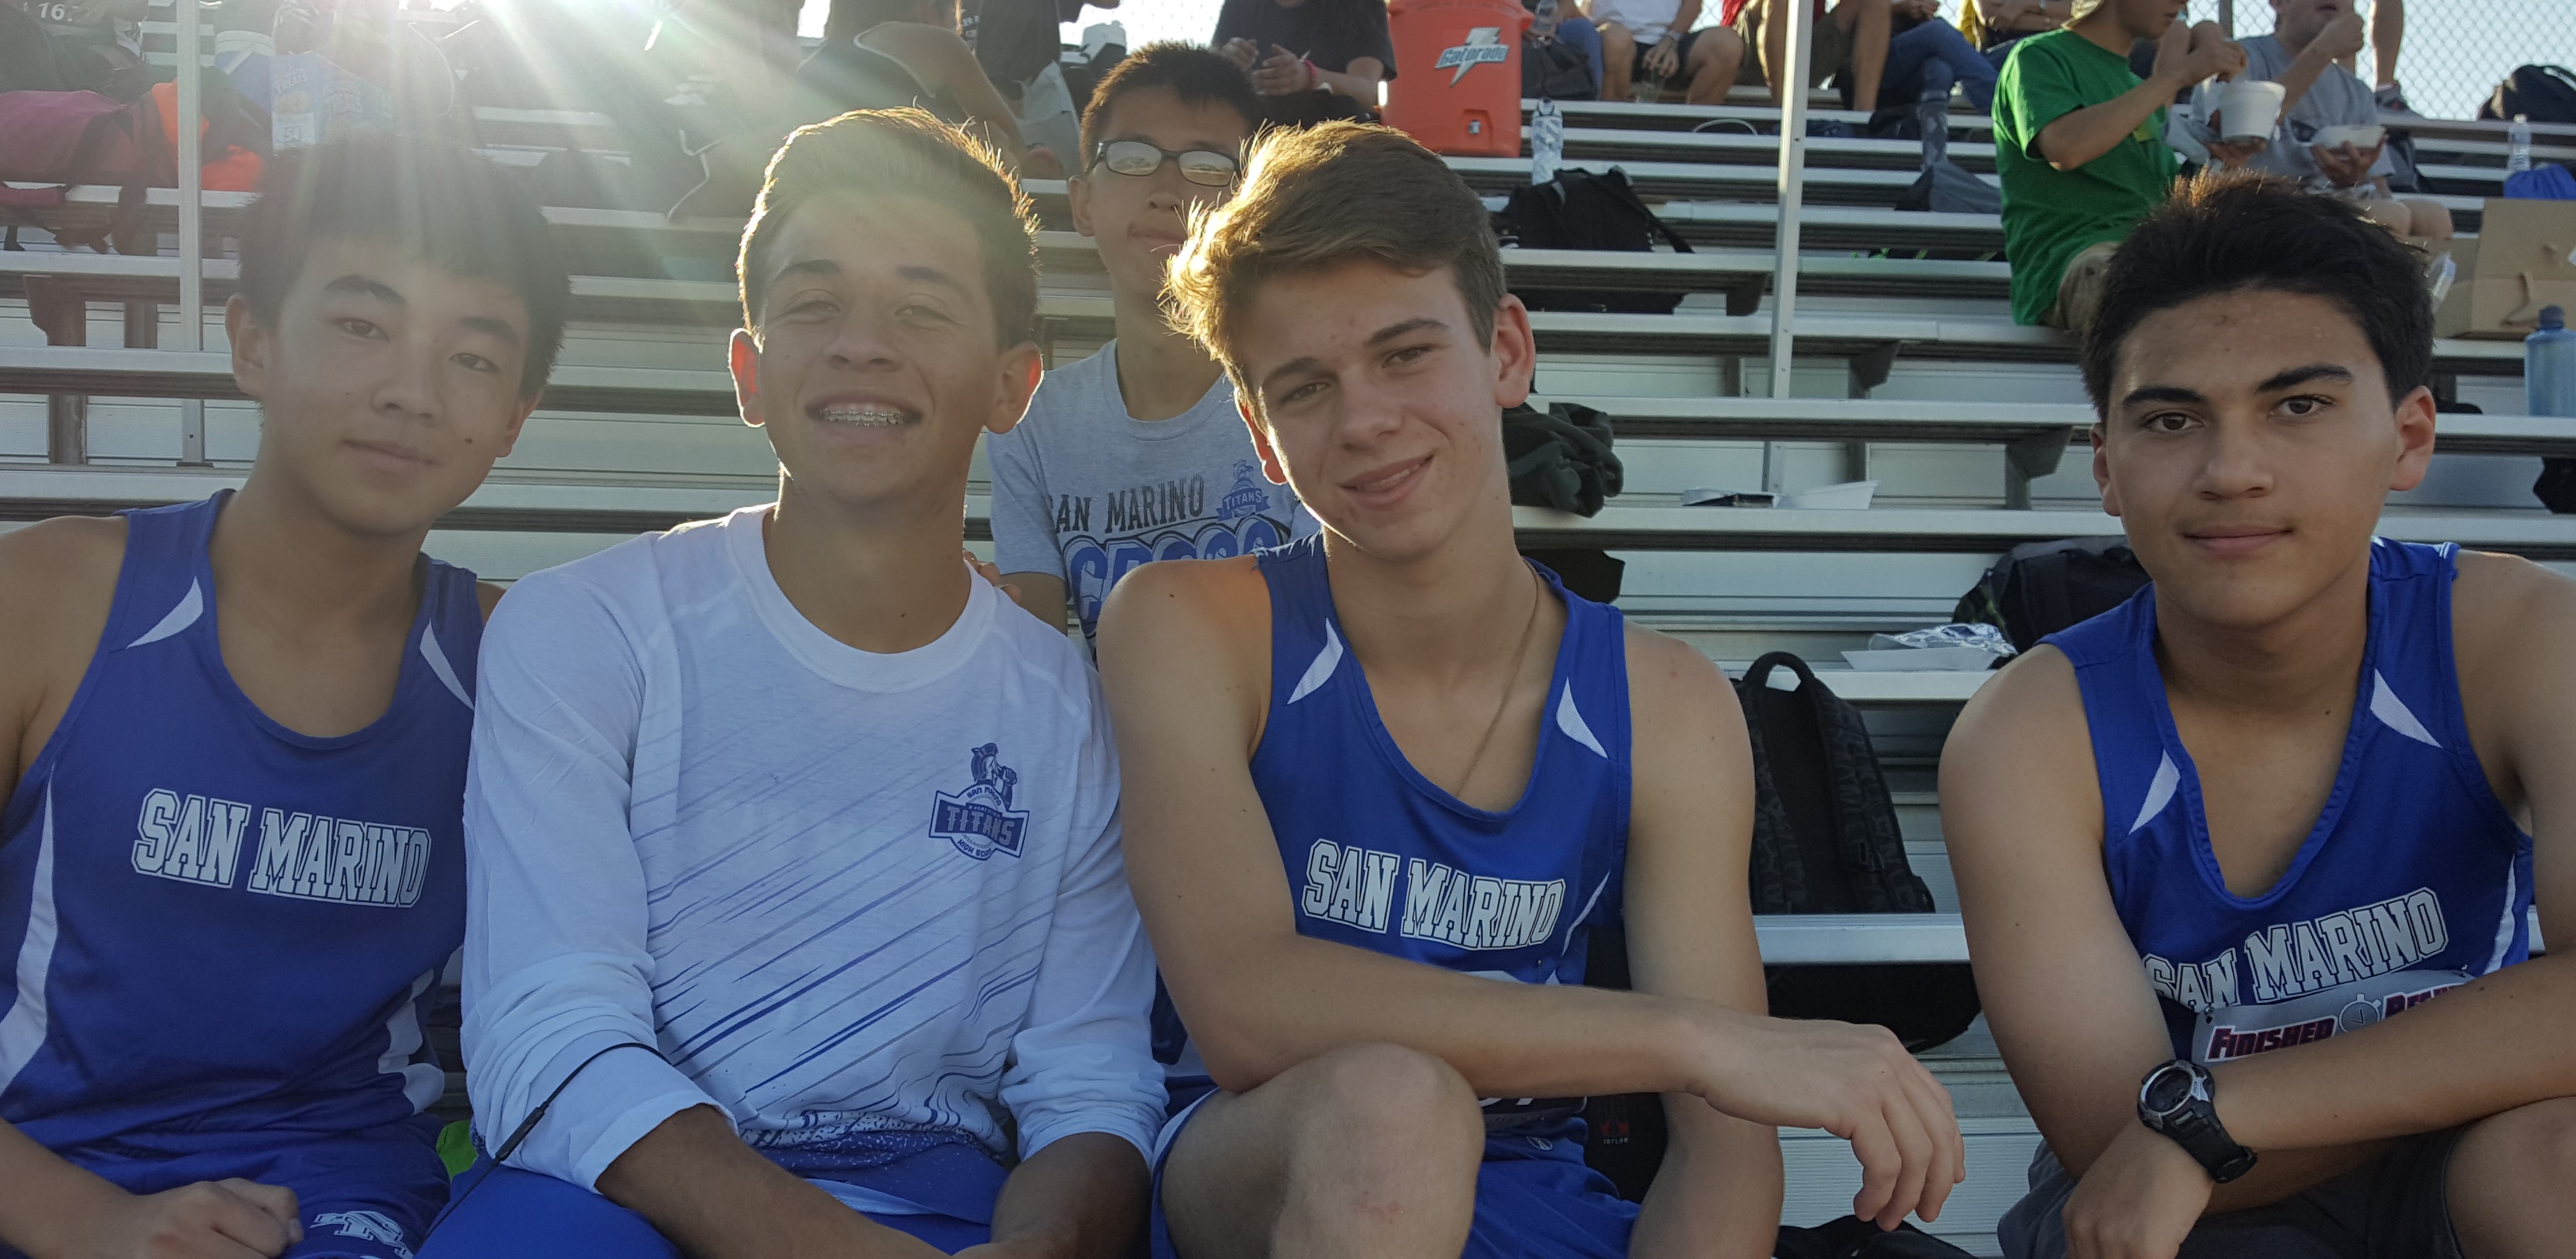 2016-09-09 - Guys in stands